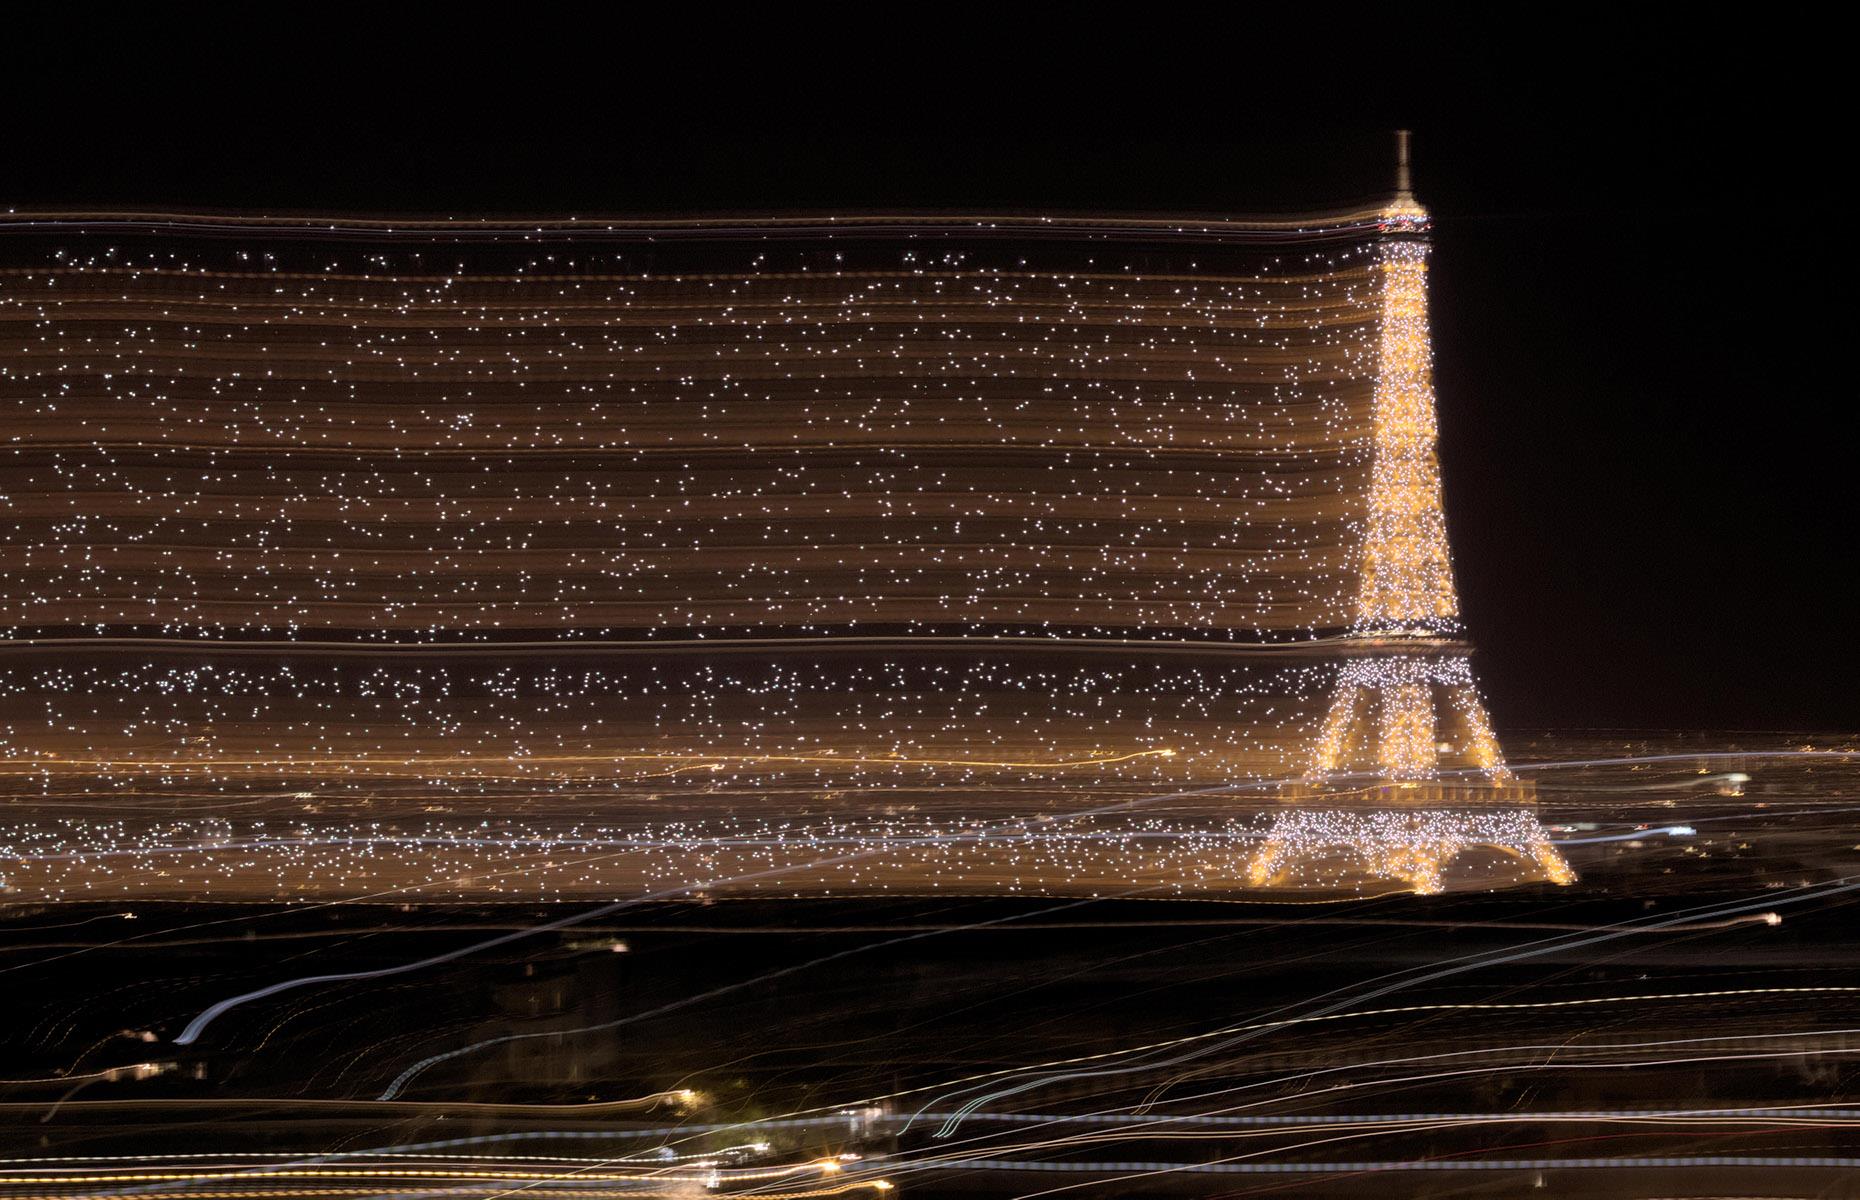 <p>Every evening, just as it gets dark, the Eiffel Tower is illuminated by 336 sodium bulbs, bathing the tower in a golden light. Since 2000, it has also sparkled, on the hour, every hour, for five minutes. The effect is created by 20,000 bulbs, flashing very rapidly, inspired by camera flashes according to its designer, Pierre Bideau. The light show used to continue until 1am in summer, but since a City of Paris energy saving plan was introduced in 2022, the lights are switched off at 11:45pm with the last sparkle at 11pm.</p>